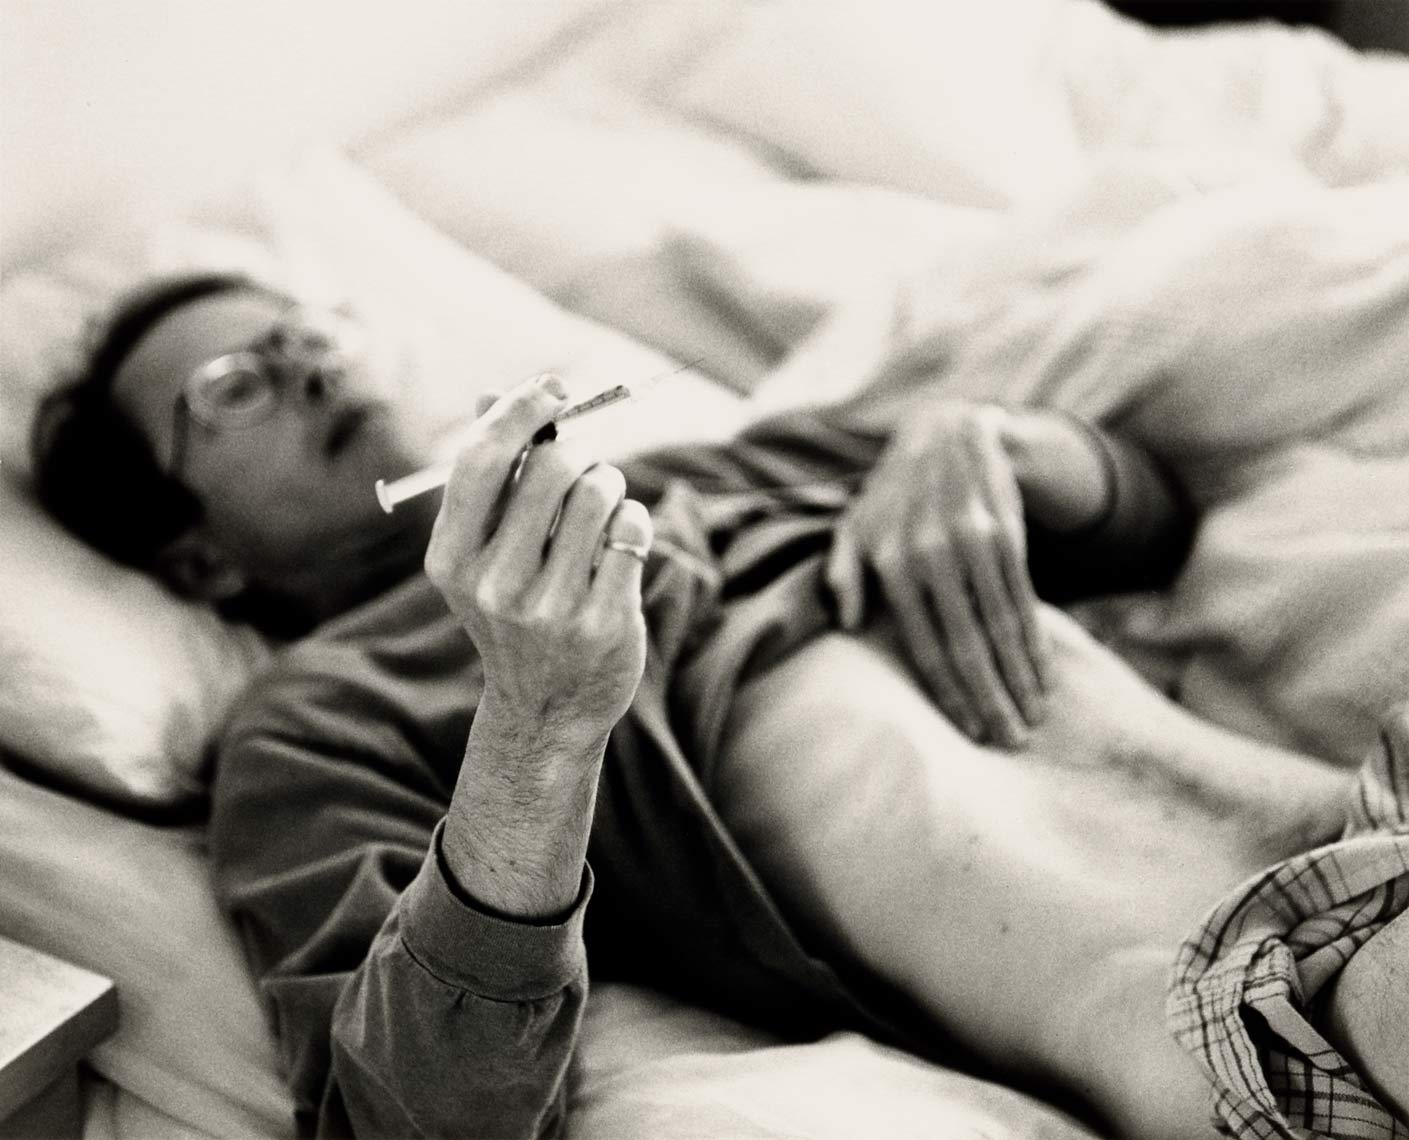 David Lebe; Morning Ritual 29, 1994, black and white photograph about living with AIDS